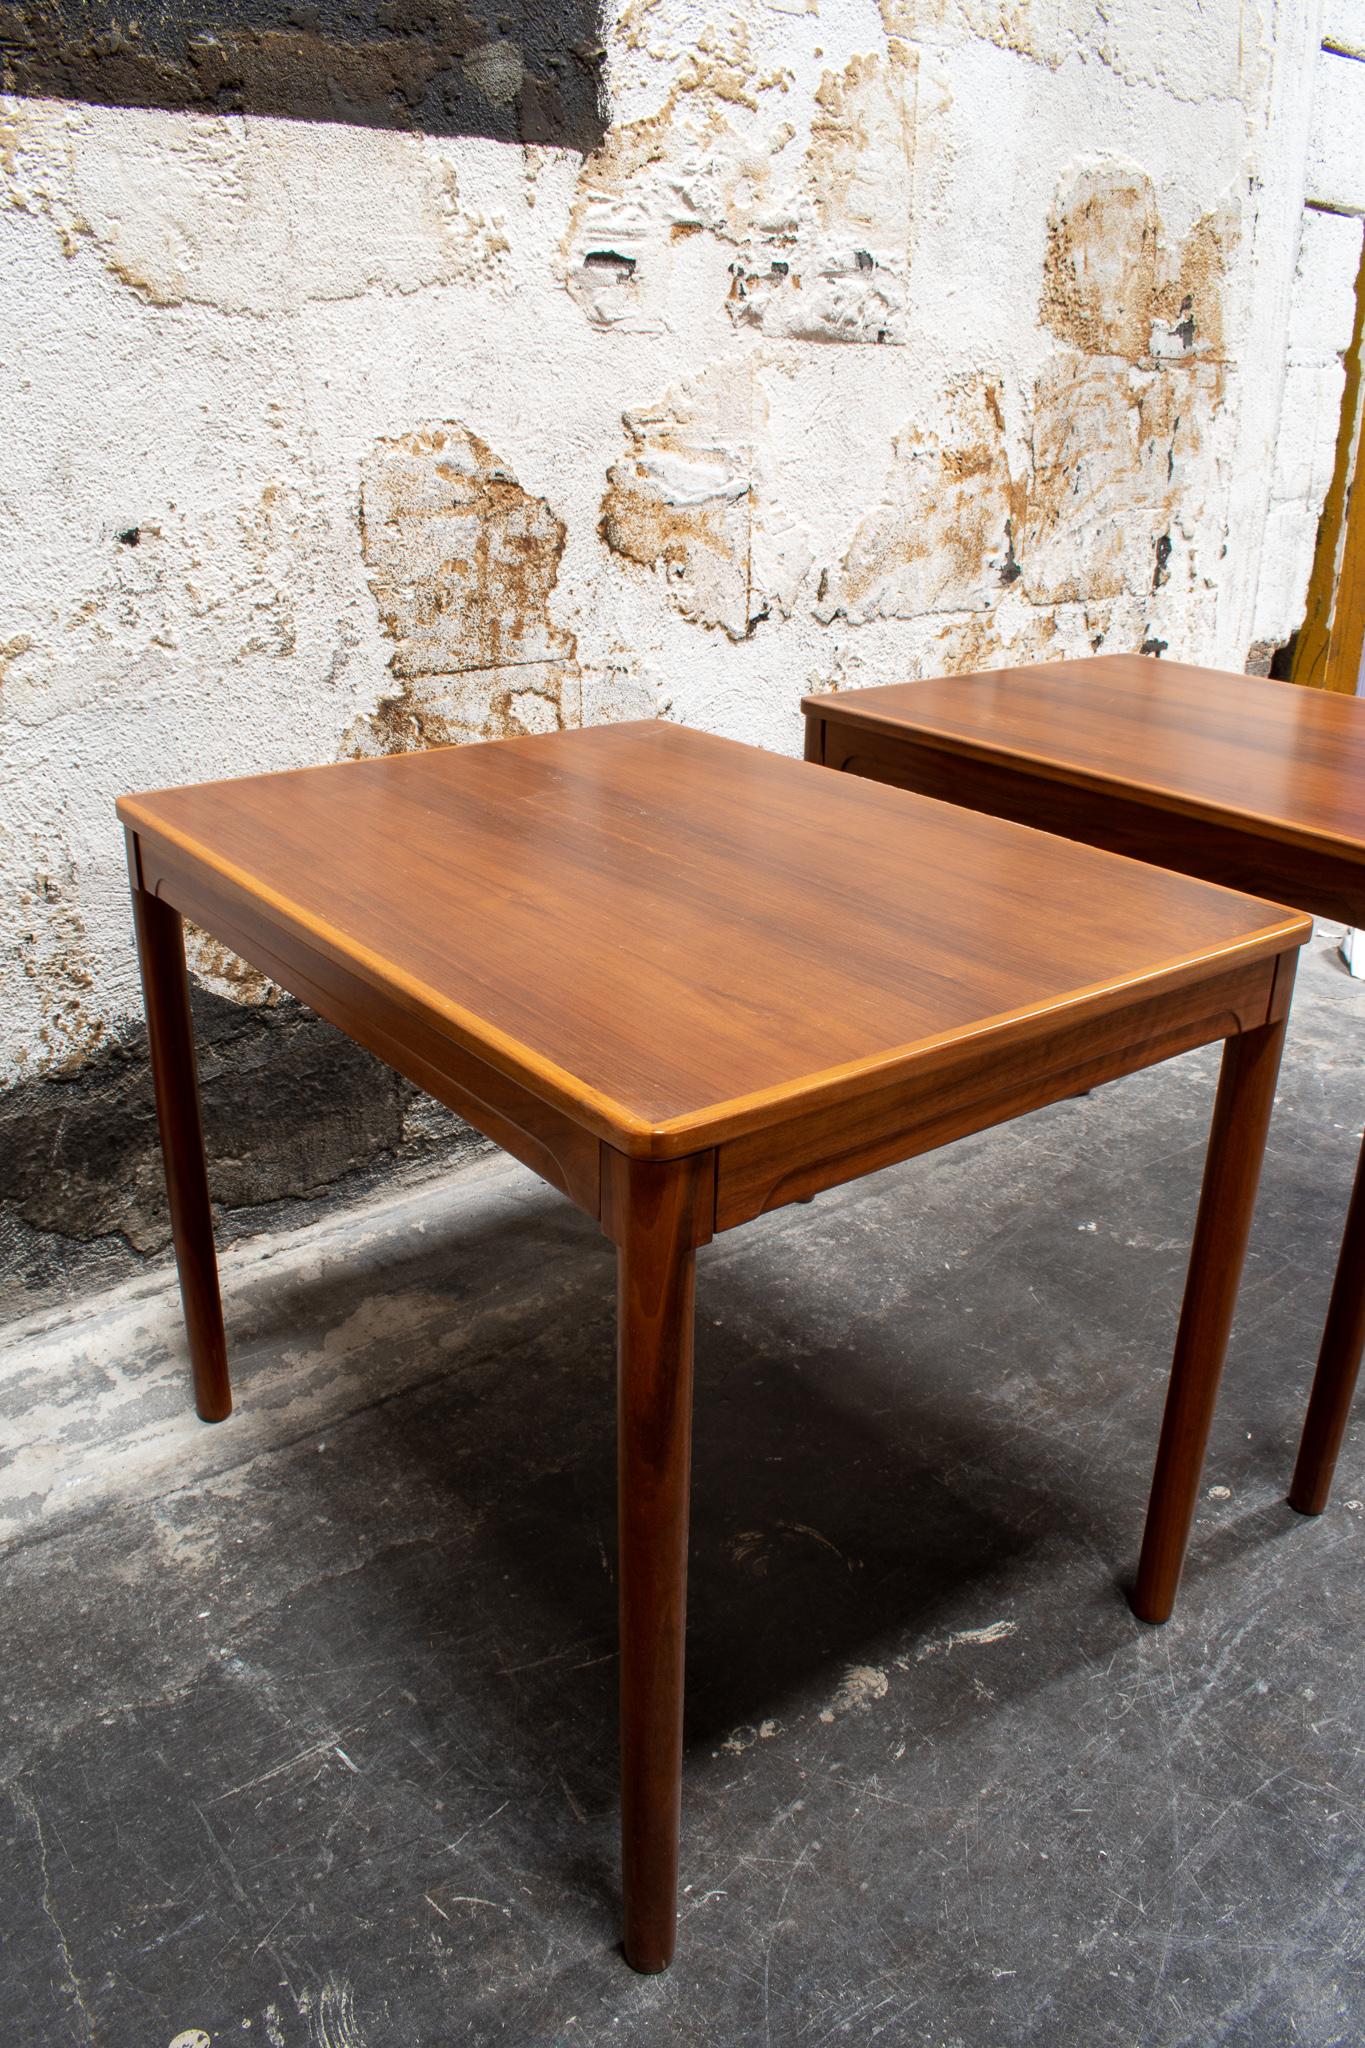 This pair of Mid-Century Modern tables would make the perfect minimal addition to any room. Simple, streamlined, classic design in excellent vintage condition.